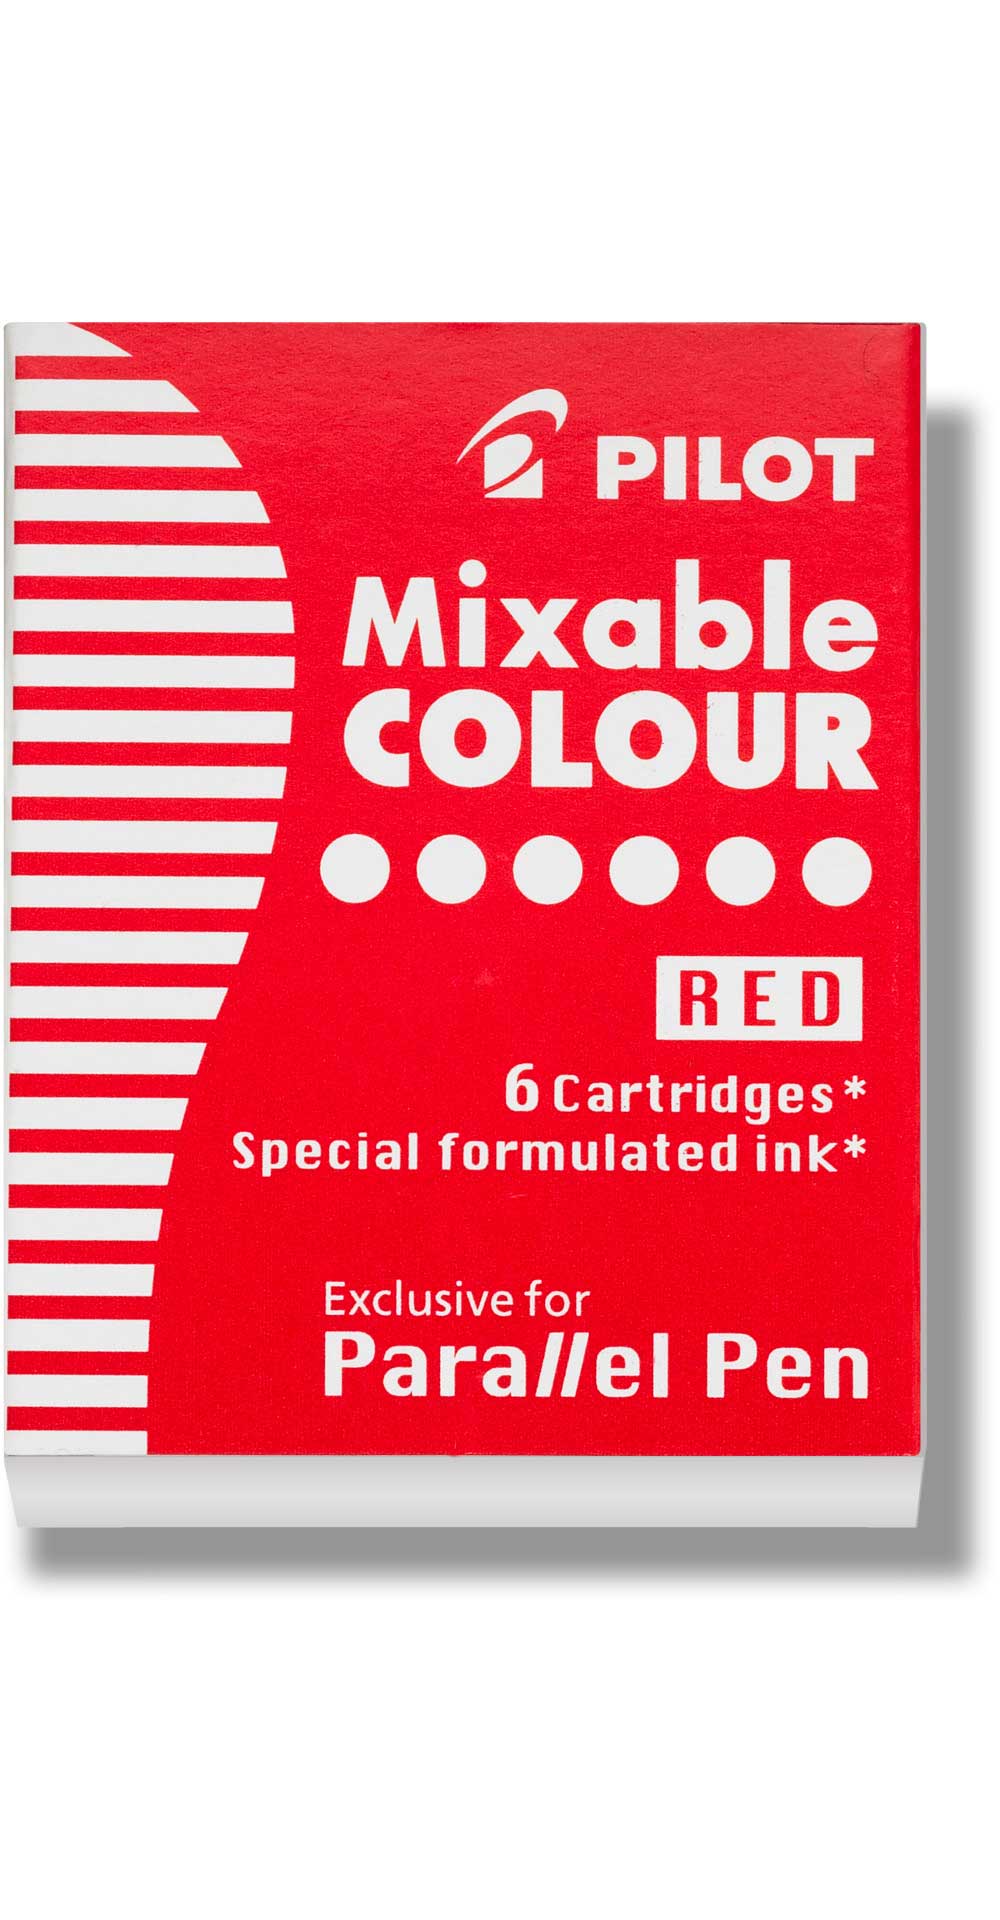 Pilot Mixable Cartridges- Red